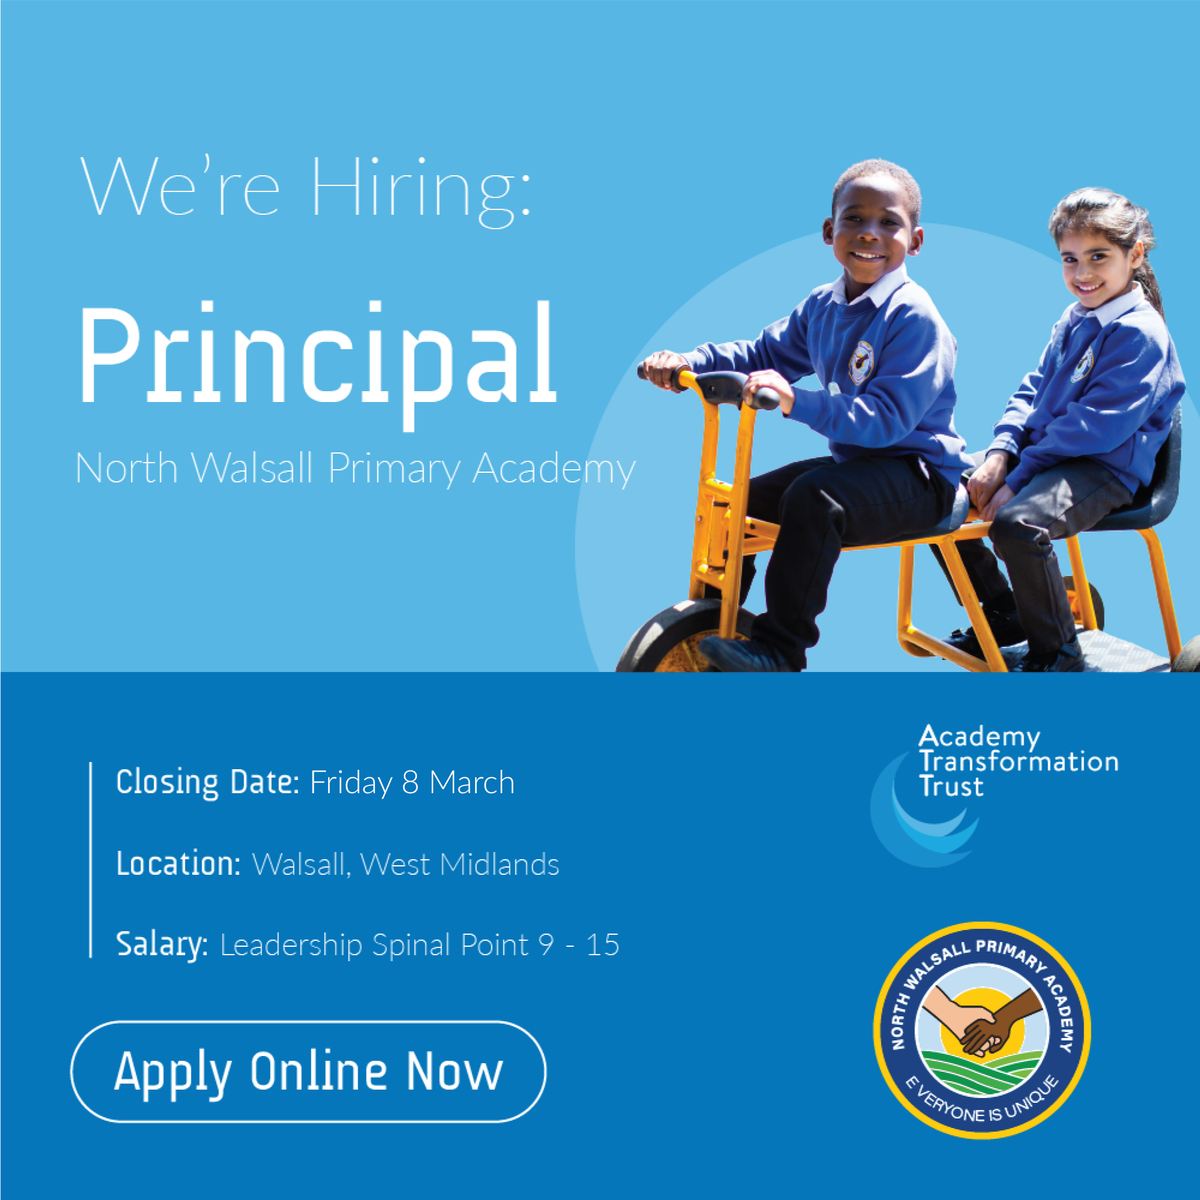 We're looking for a motivated and enthusiastic primary Principal to lead our amazing team at @NorthWalsall Think you're right for the job, or know someone who might be? Find out more and apply: eteach.com/careers/academ… #edujobs #westmidlands #primaryeducation #headteacher